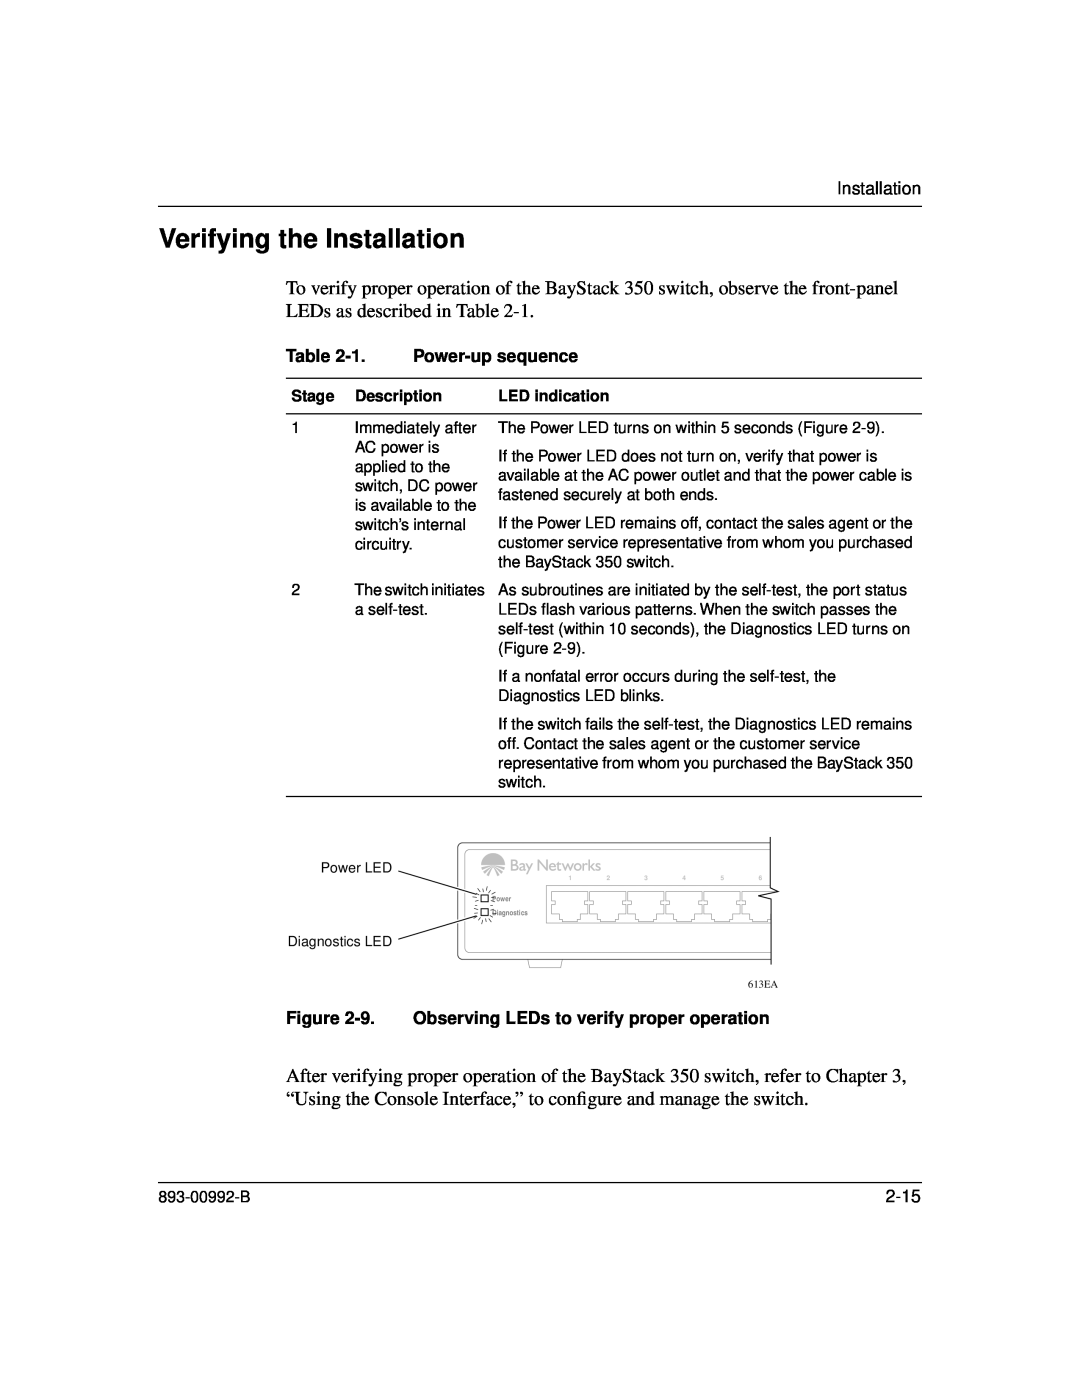 Bay Technical Associates 350 manual Verifying the Installation, 1. Power-up sequence 